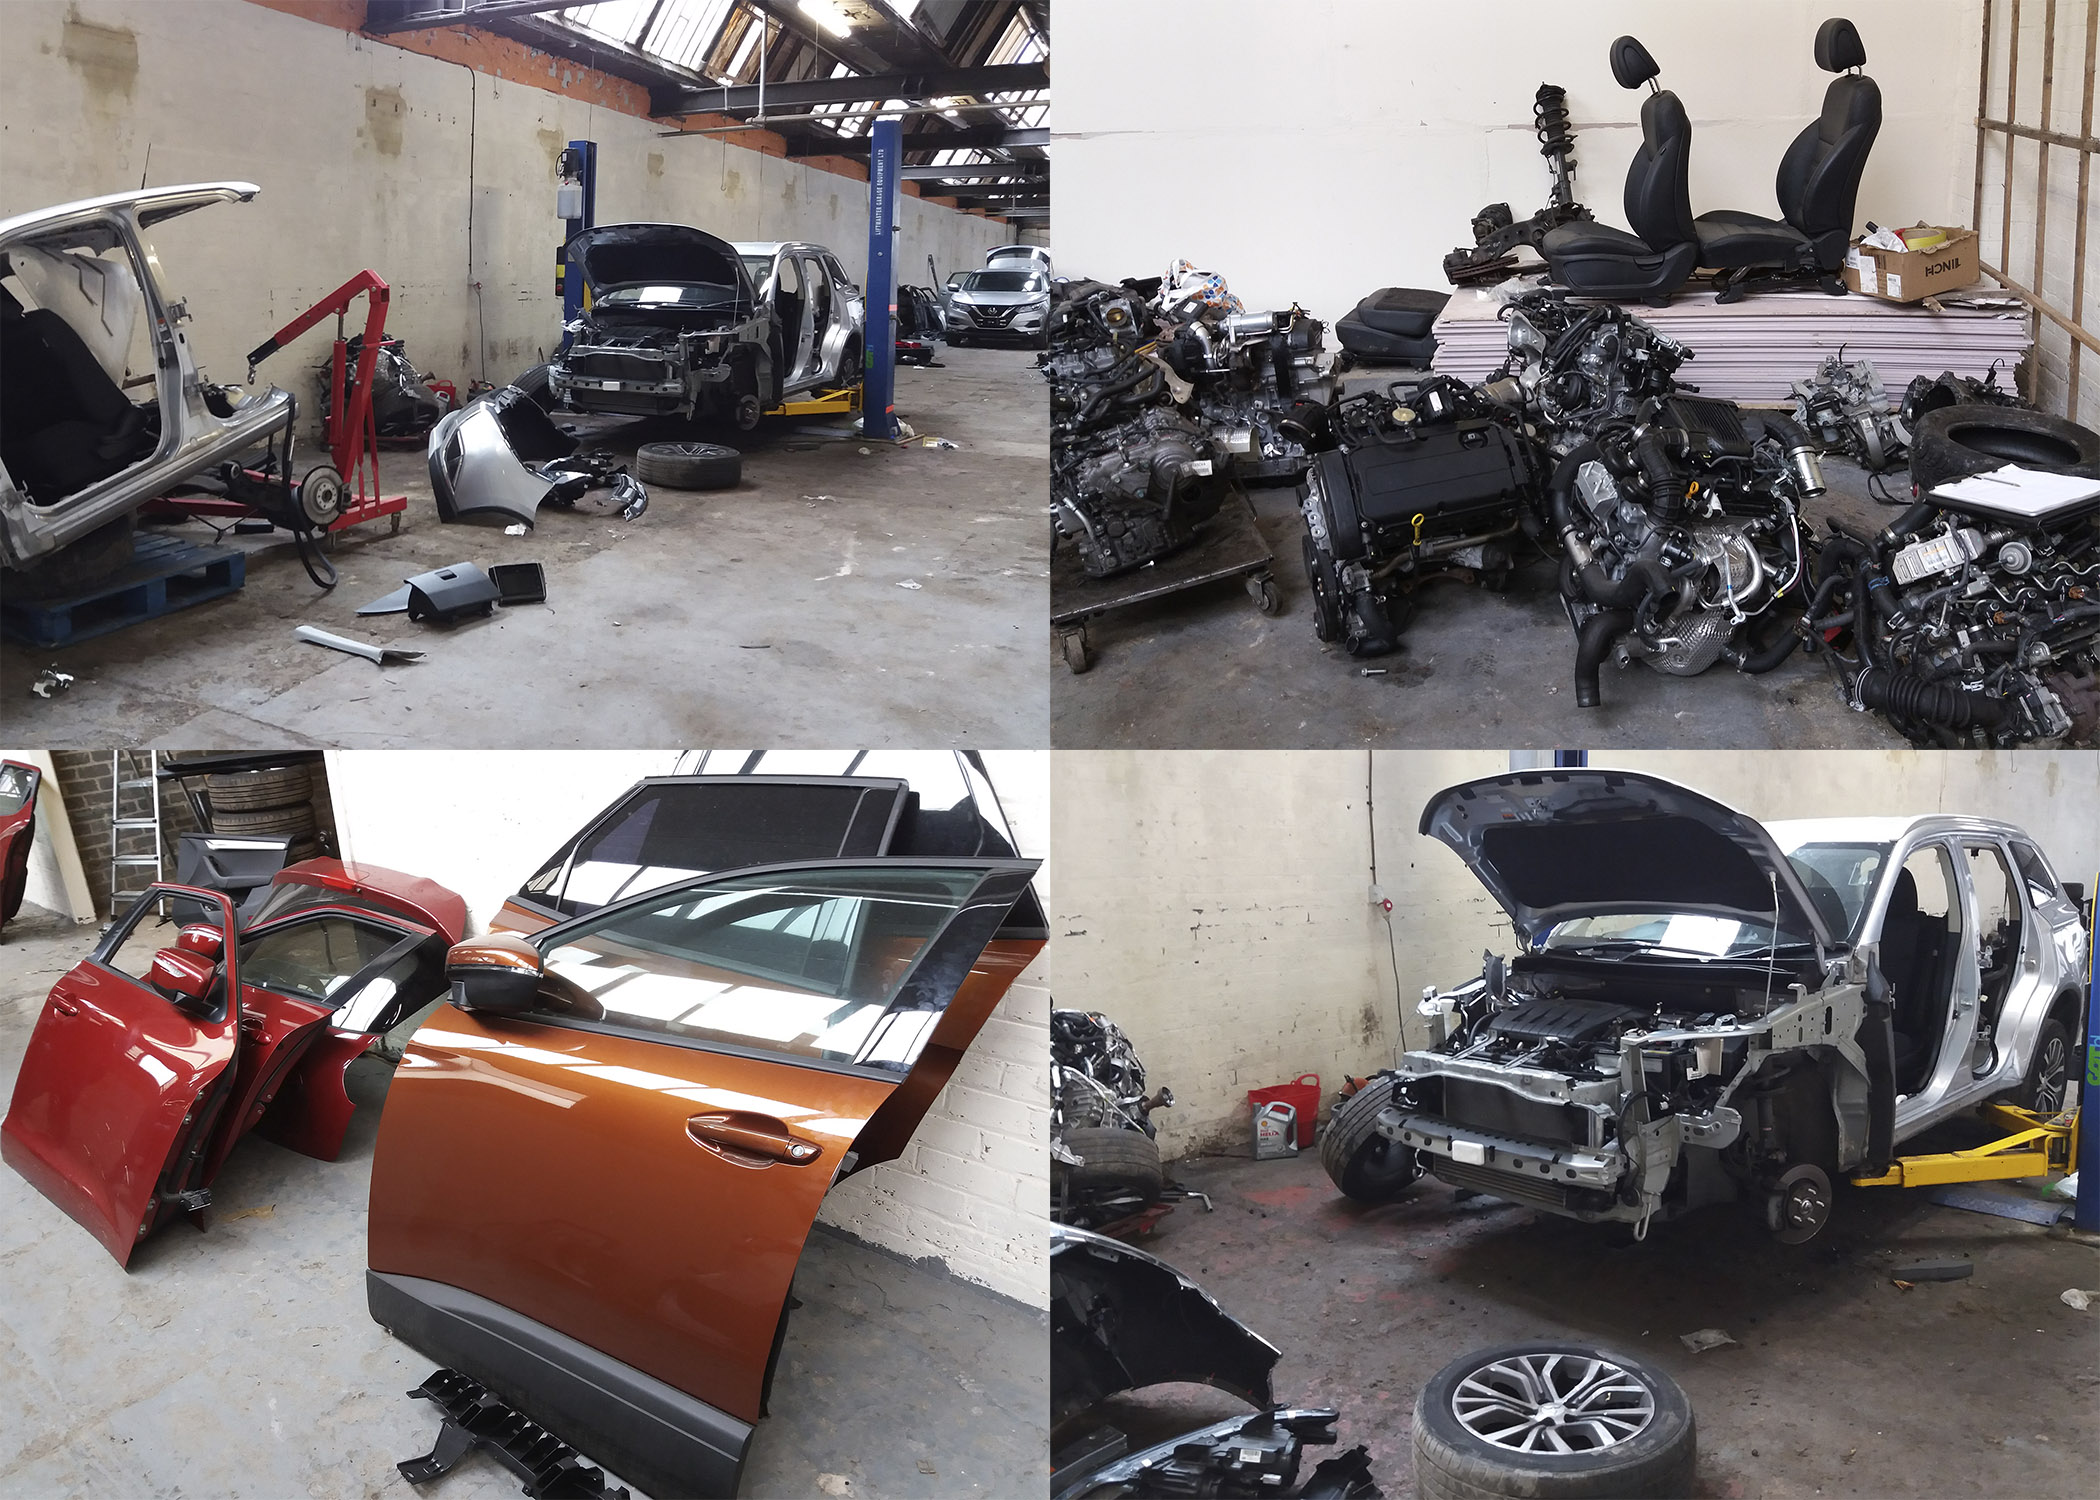 £240k &#8216;chop shop&#8217; found in Bury after man mistakenly sells stolen parts to police on eBay, The Manc